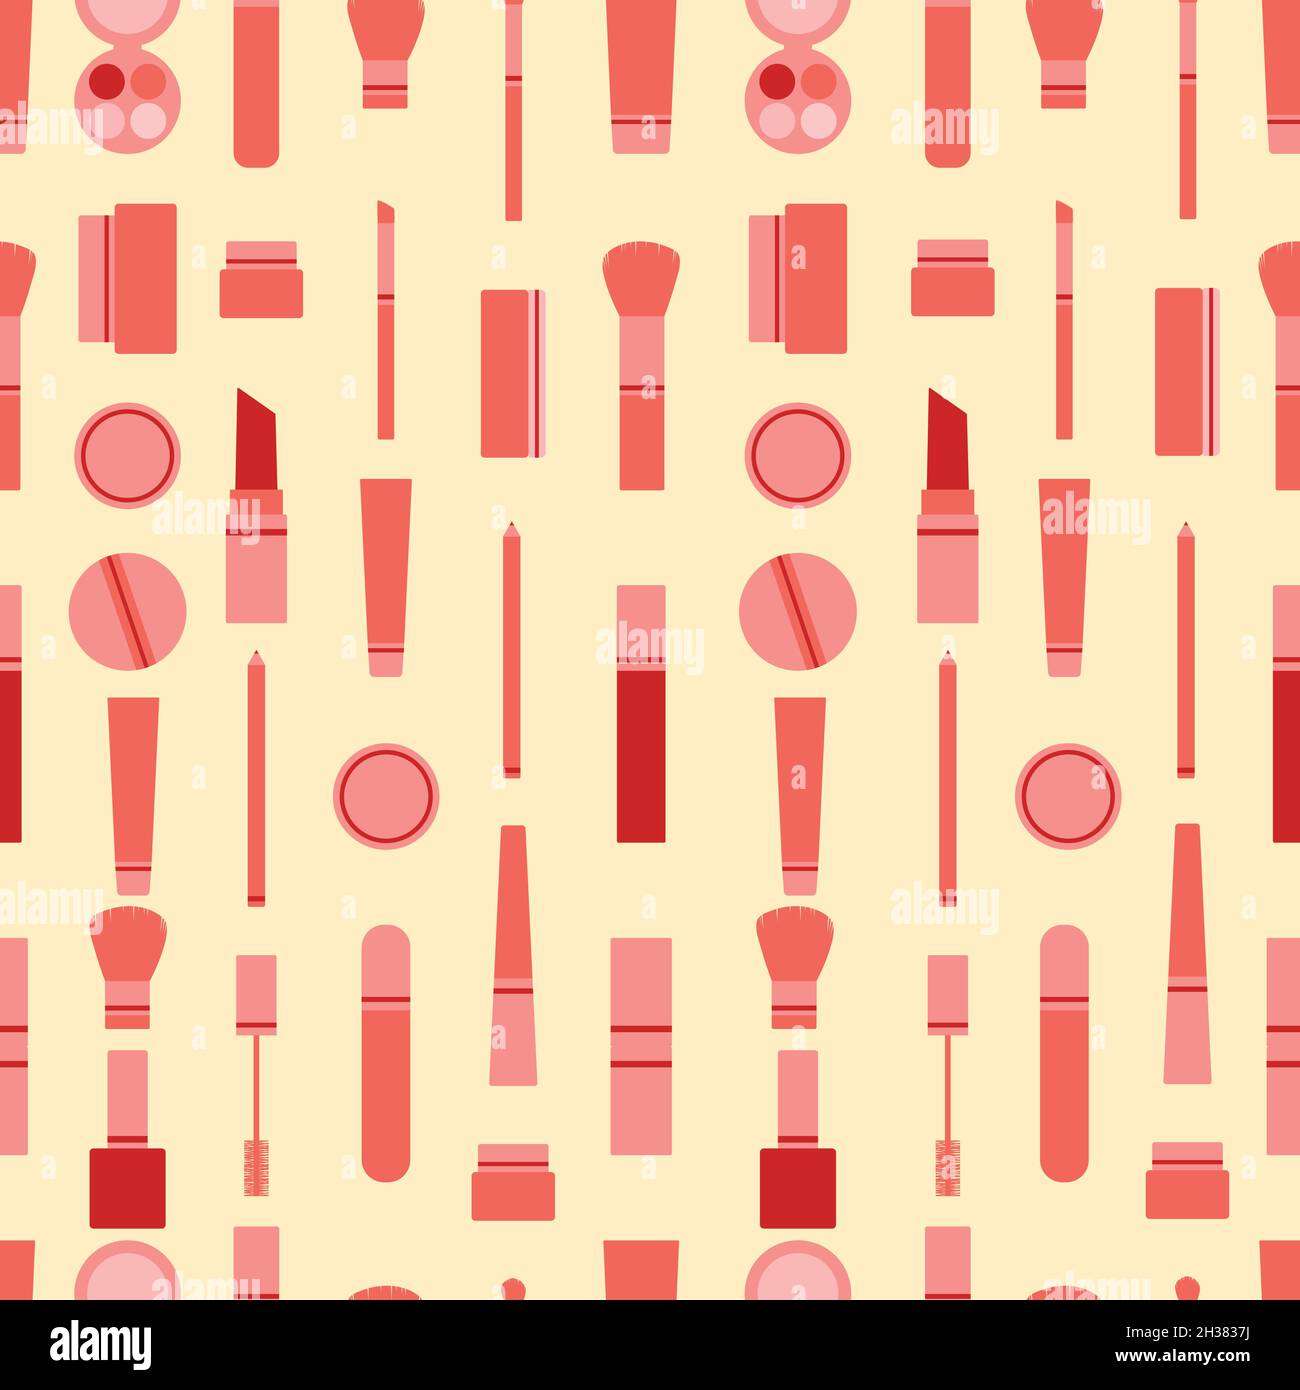 Vector seamless pattern full of makeup items aligned. Makeup with lipstick, mascara, shadows, pencils and brushes in pink and red colors Stock Vector